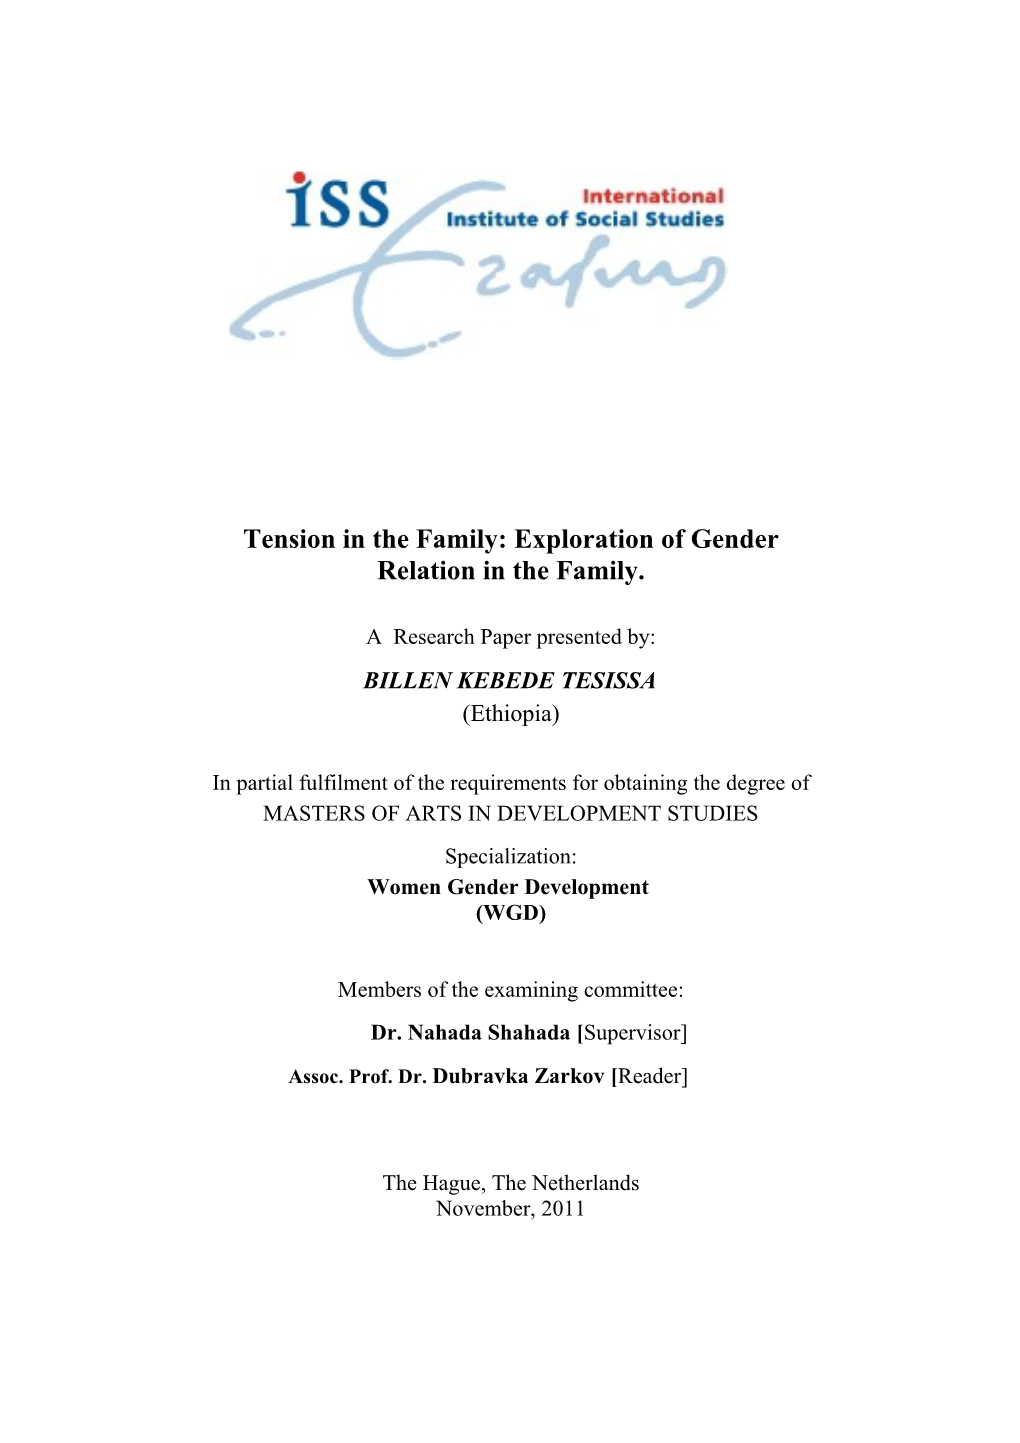 Tension in the Family: Exploration of Gender Relation in the Family